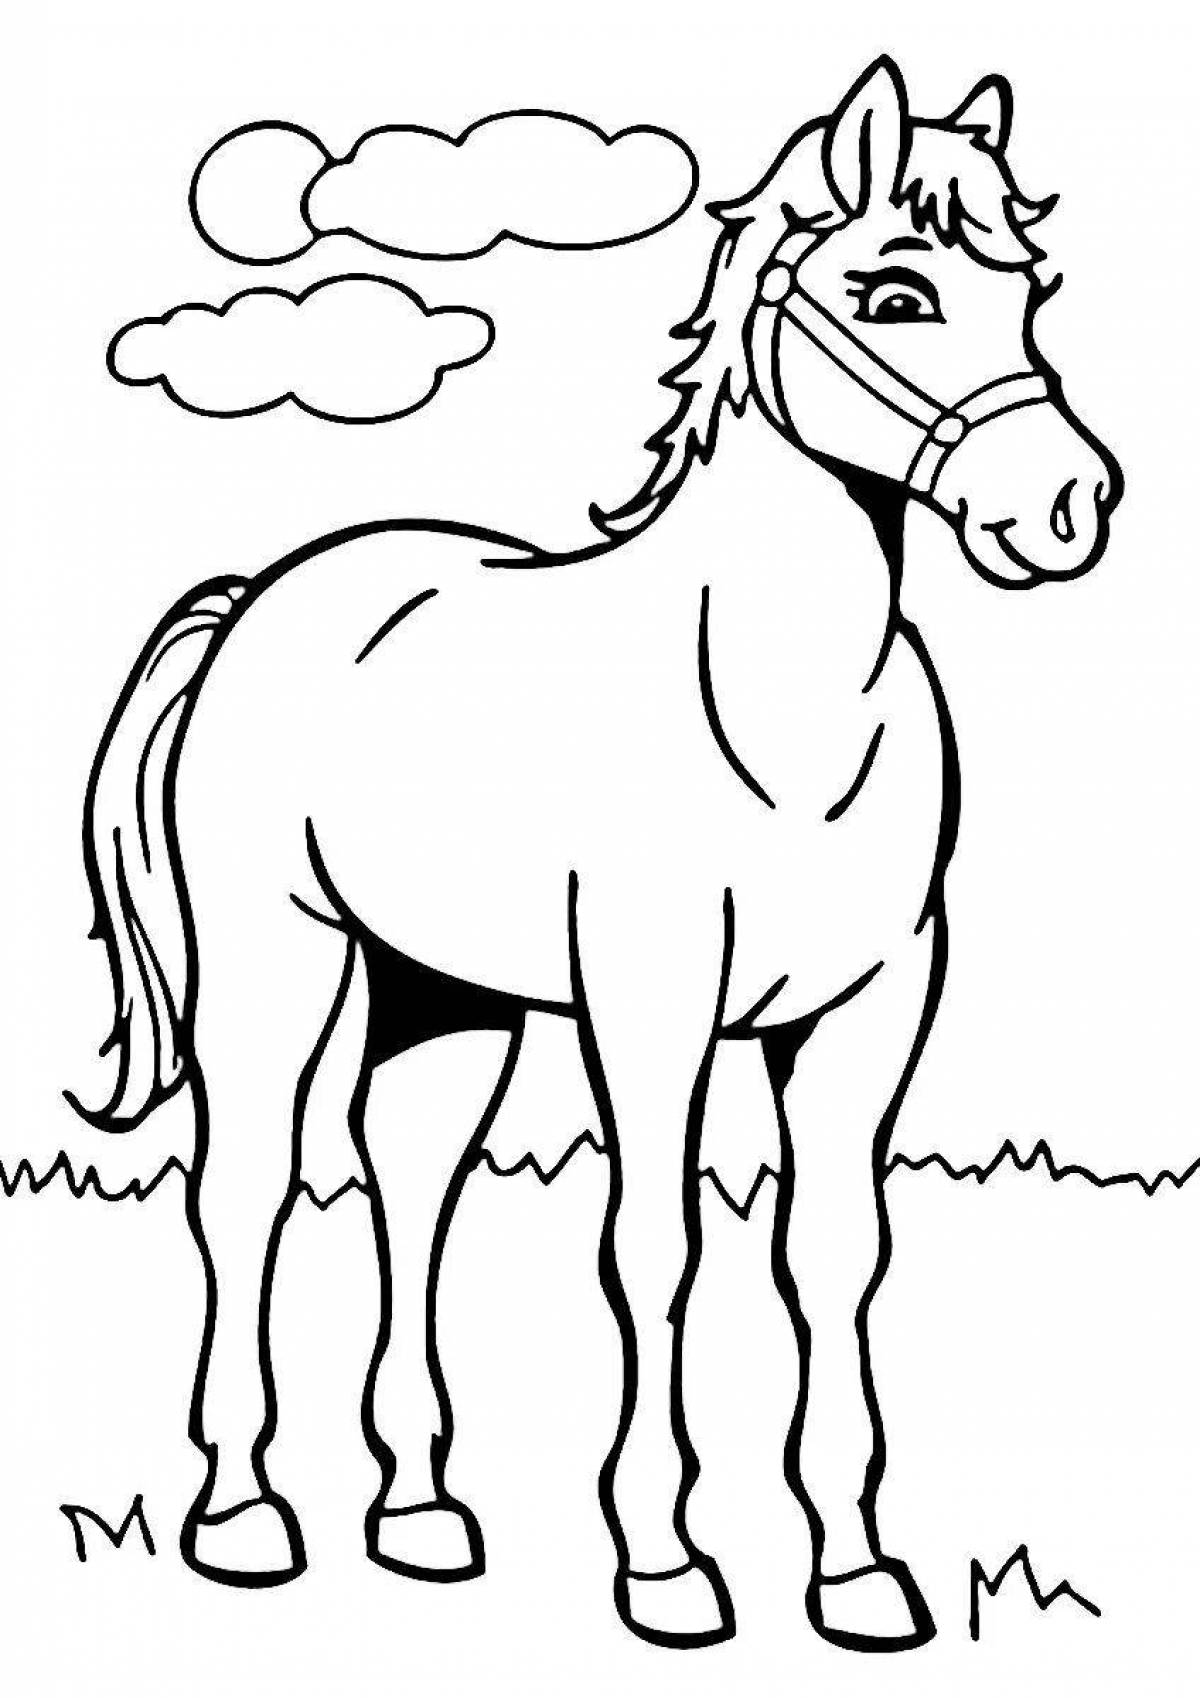 Exalted beautiful horse coloring page